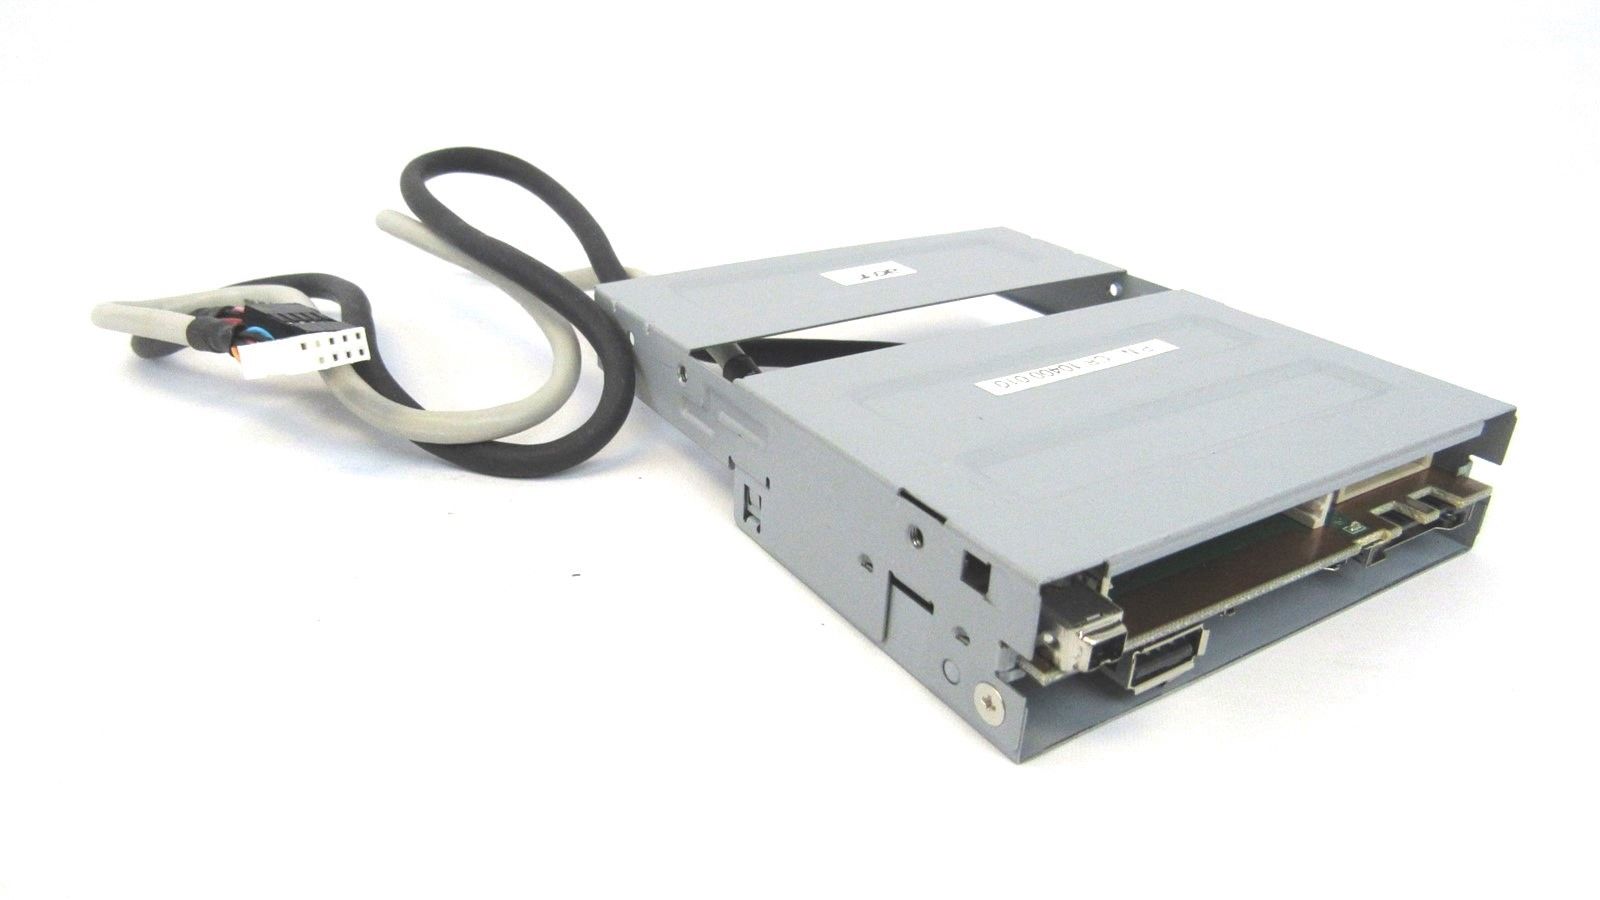 Acer Aspire AM5641 Card Reader USB DV Port and Cable CR.10400.010